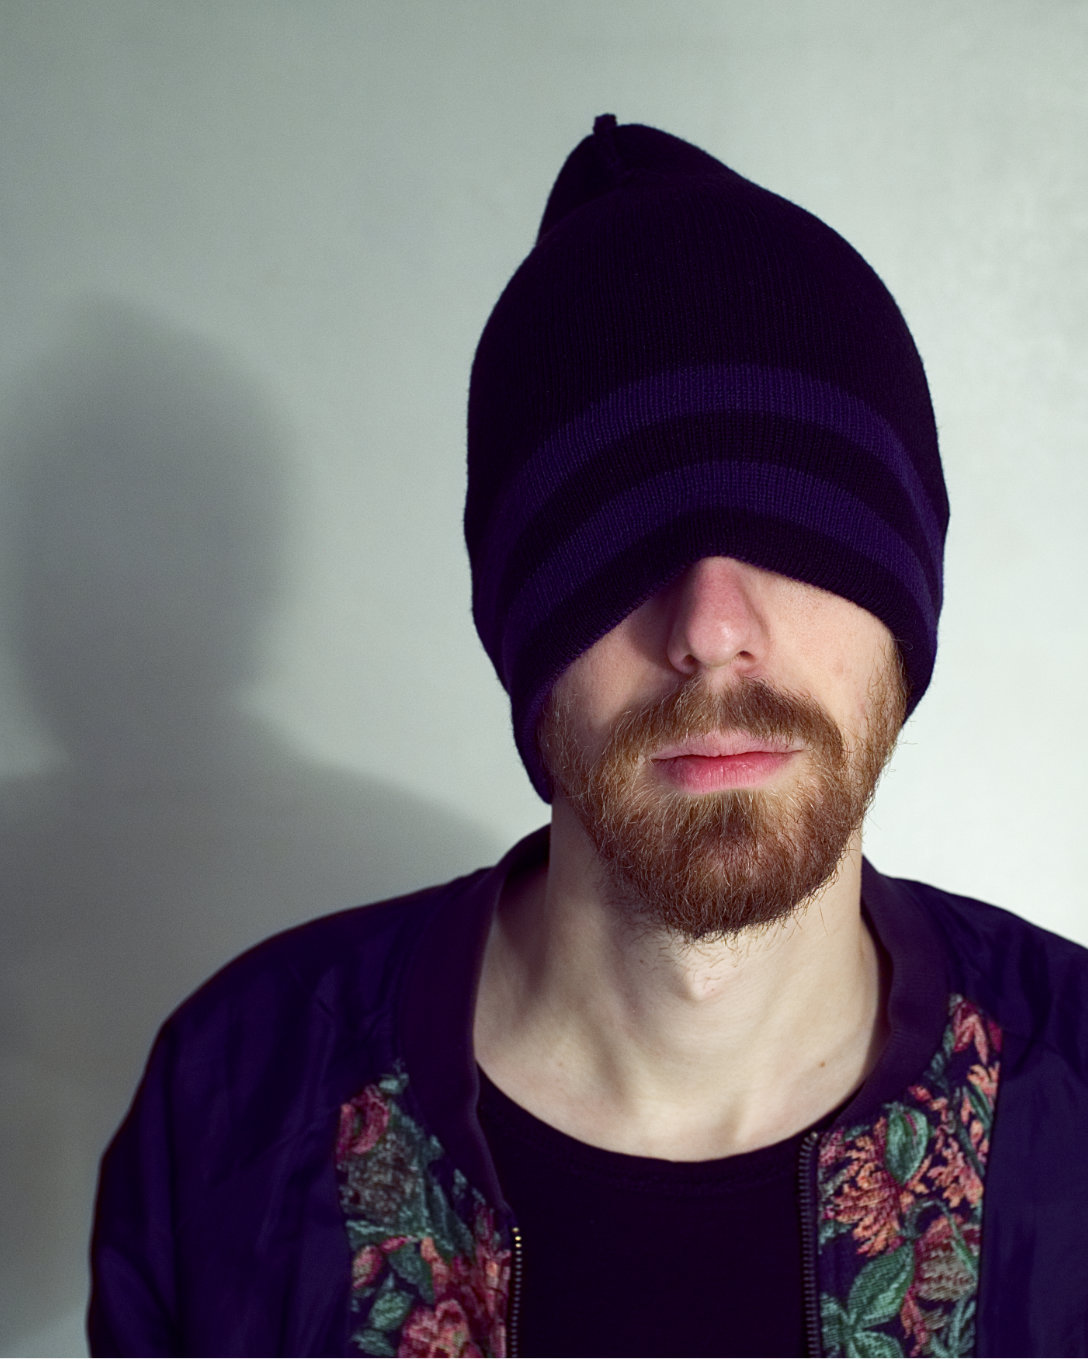 Model wears a knit cap lowered down to cover their eyes